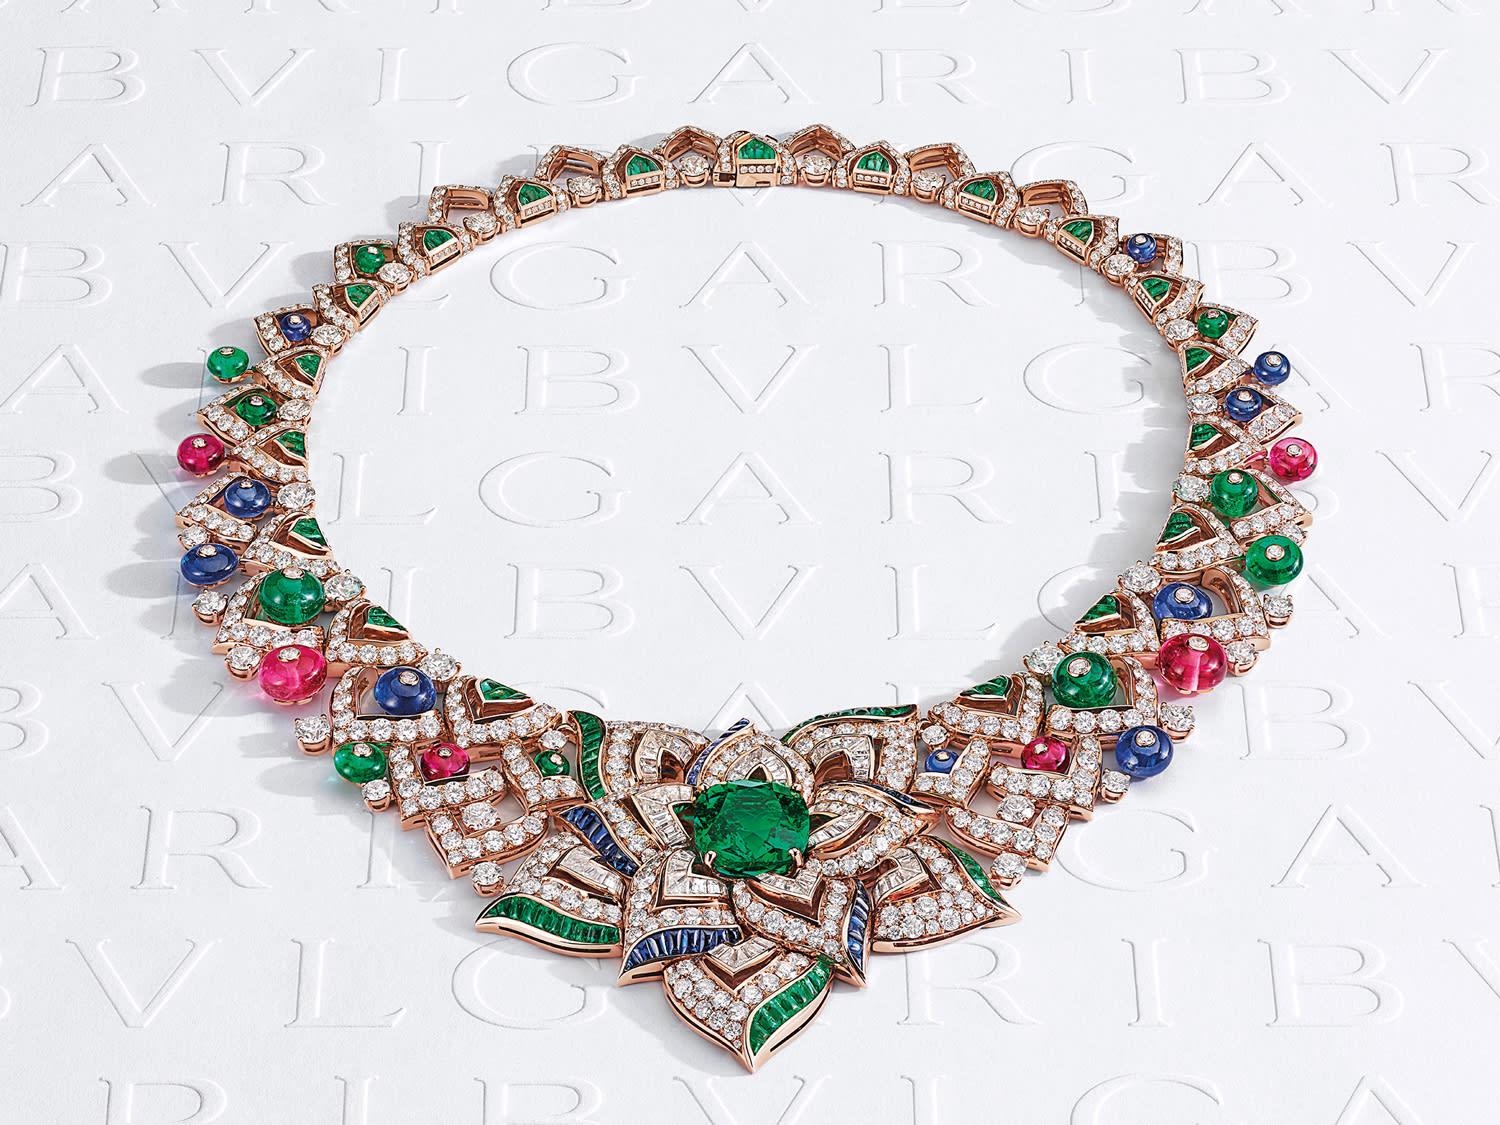 The most riveting necklaces from Cartier, Dior, Bulgari, Van Cleef